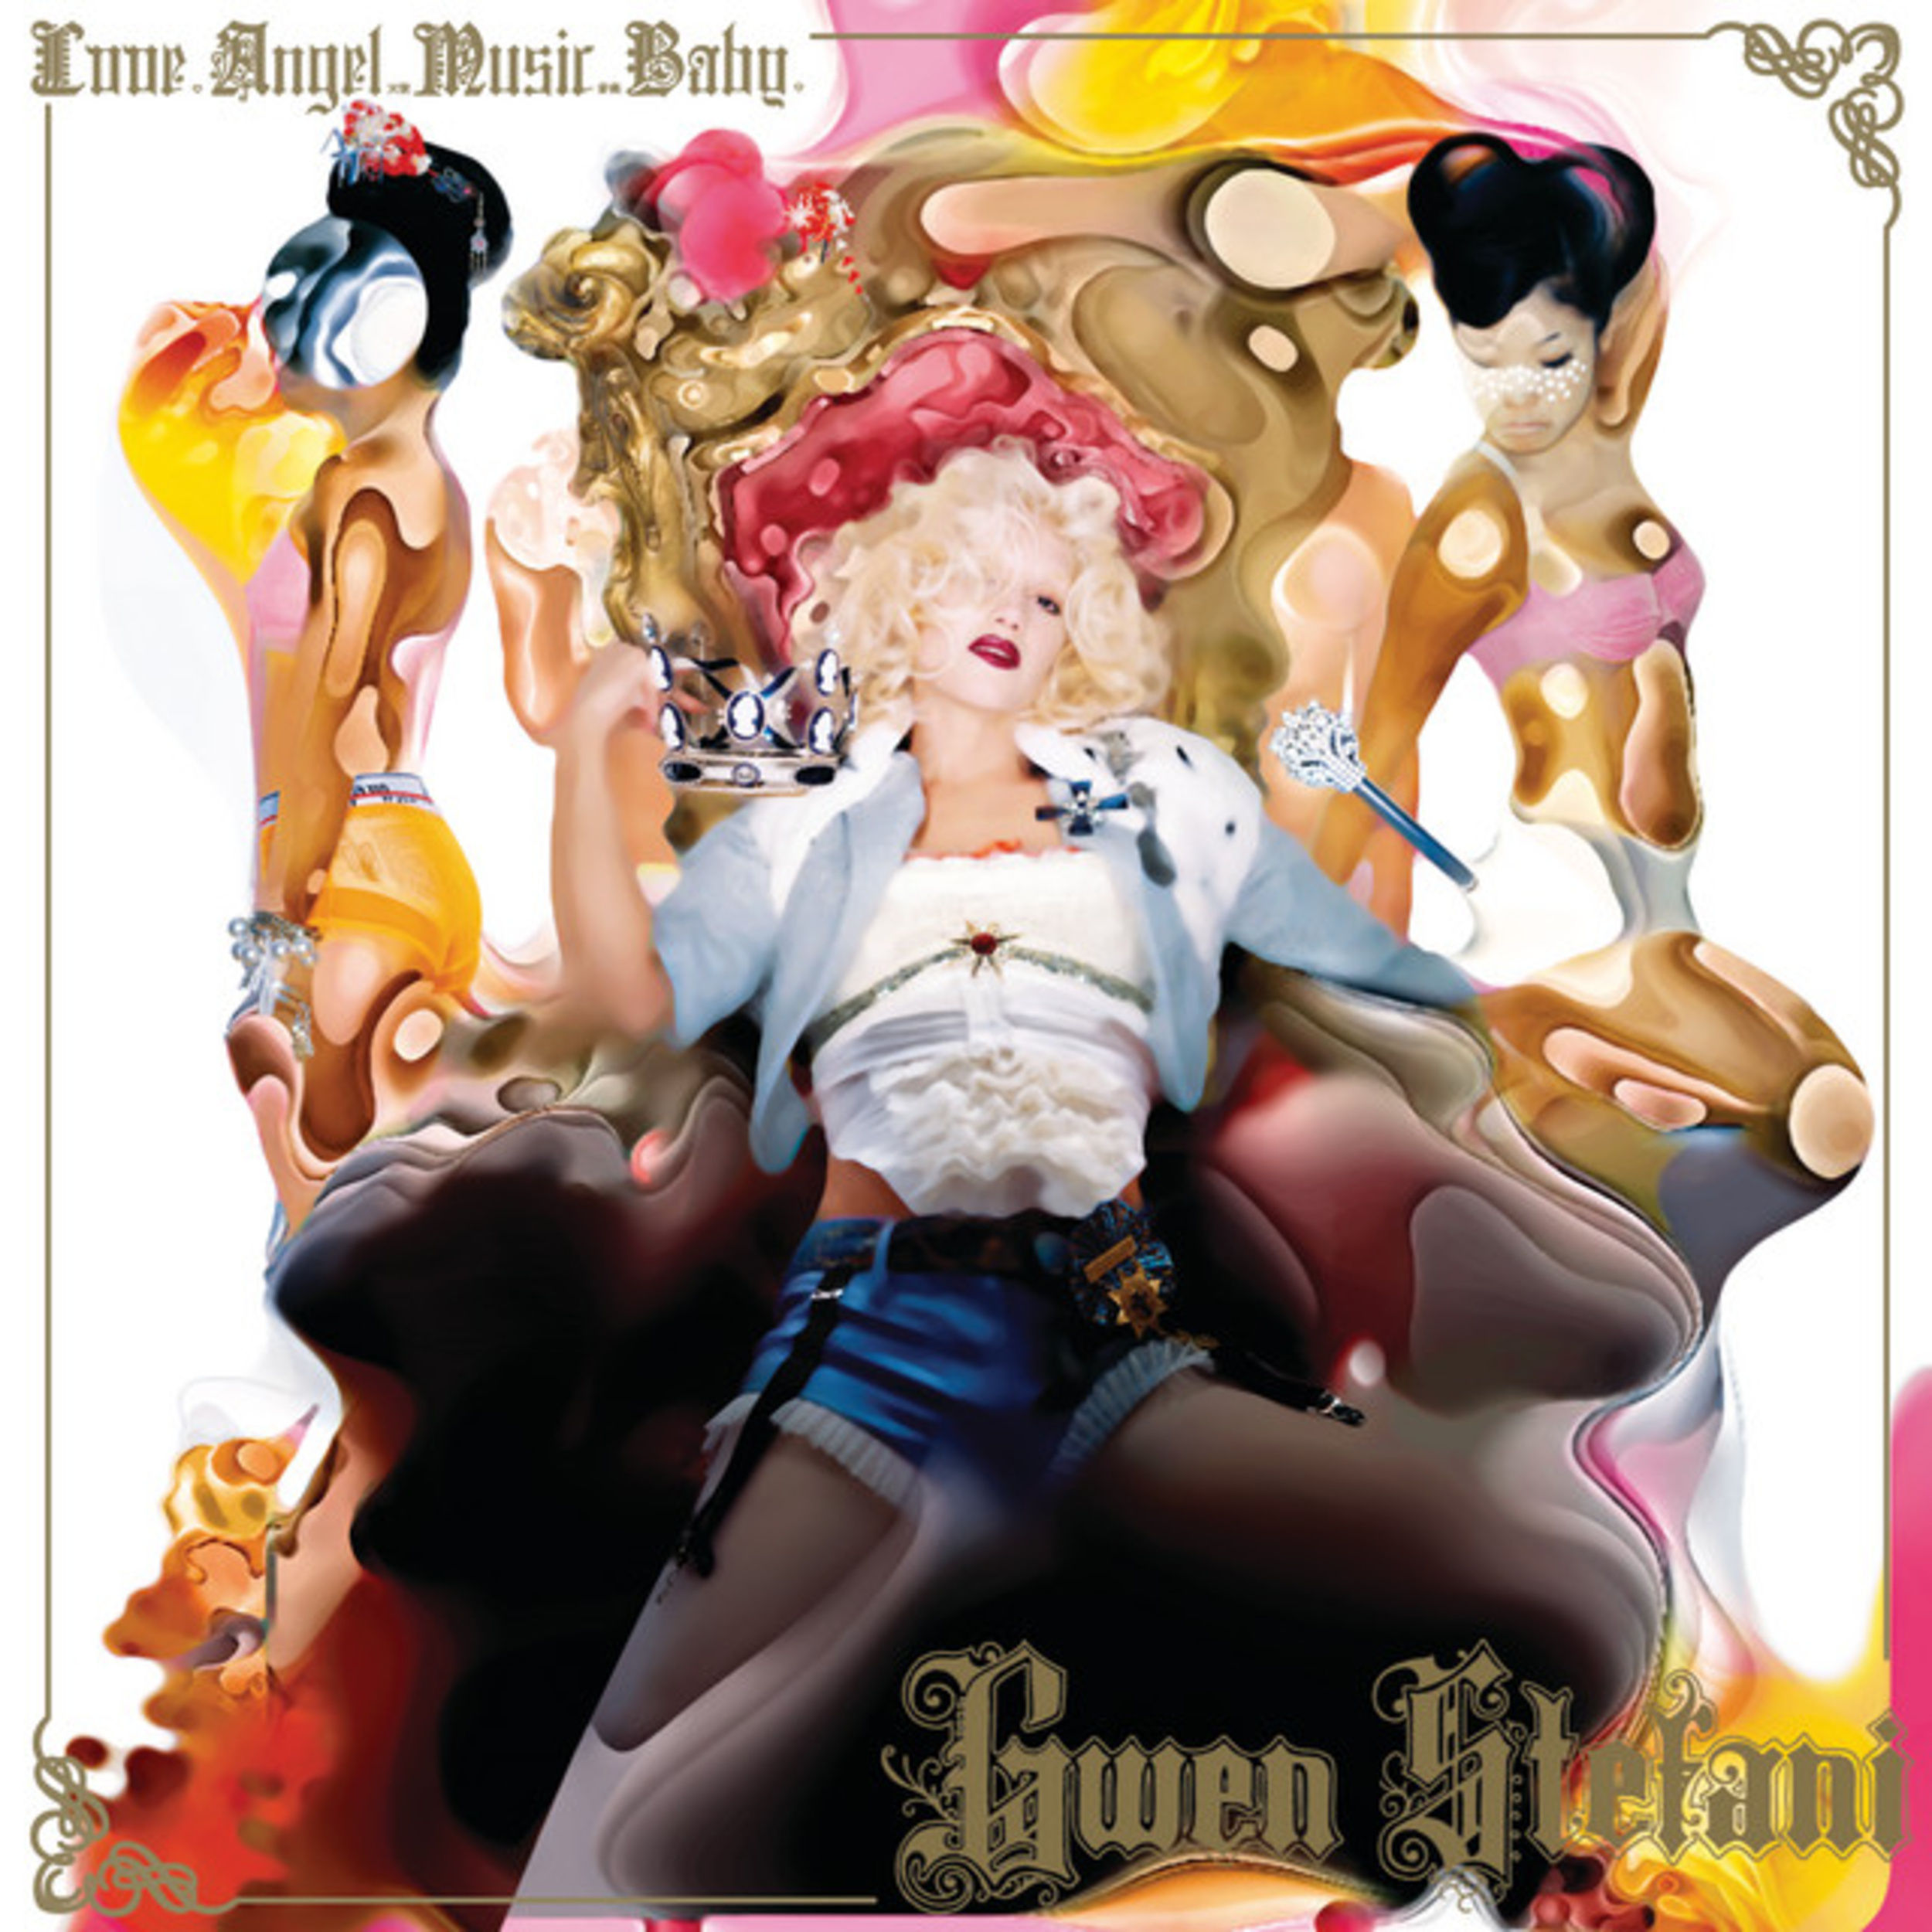 <p>Throughout the '90s and early 2000s, Gwen Stefani was known as the lead singer of the band No Doubt. In 2004, she decided to embark on a solo career with her debut album, <em>Love. Angel. Music. Baby.</em> Stefani expanded her sound a bit, working with producers like The Neptunes, Dr. Dre, Andre 3000, and Jimmy Jam and Terry Lewis. Some of the album's hit singles include "Rich Girl," <a href="https://www.youtube.com/watch?v=Kgjkth6BRRY">"Hollaback Girl,"</a> and "Luxurious." </p><p><a href='https://www.msn.com/en-us/community/channel/vid-cj9pqbr0vn9in2b6ddcd8sfgpfq6x6utp44fssrv6mc2gtybw0us'>Follow us on MSN to see more of our exclusive entertainment content.</a></p>